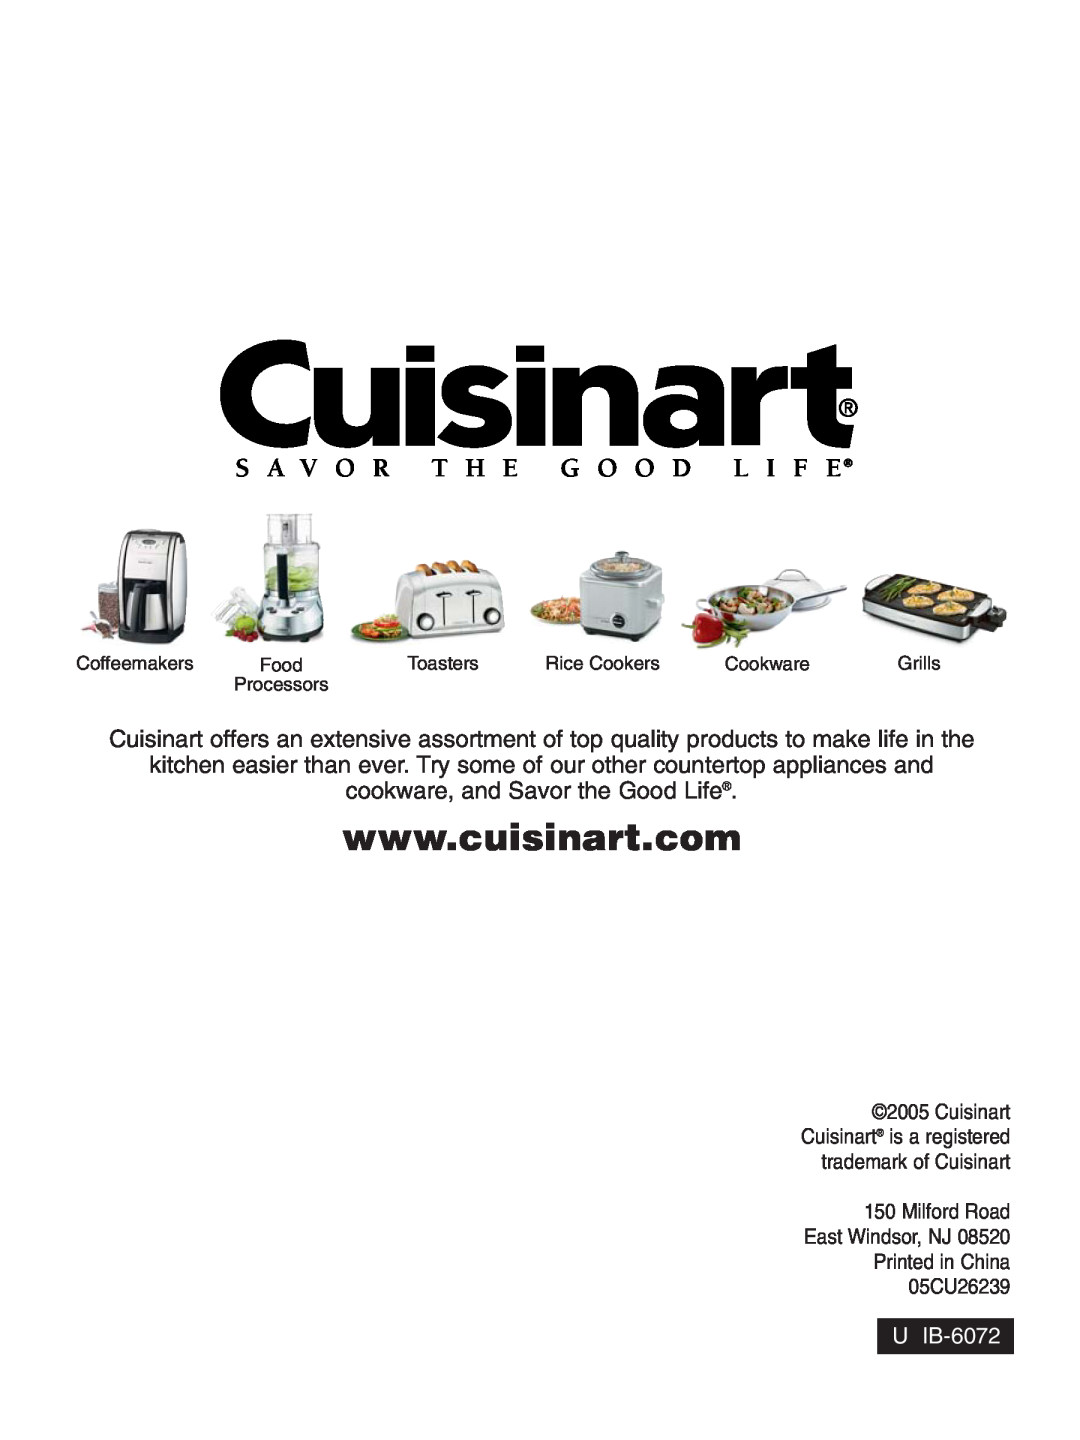 Cuisinart PRC-12 Series manual cookware, and Savor the Good Life 